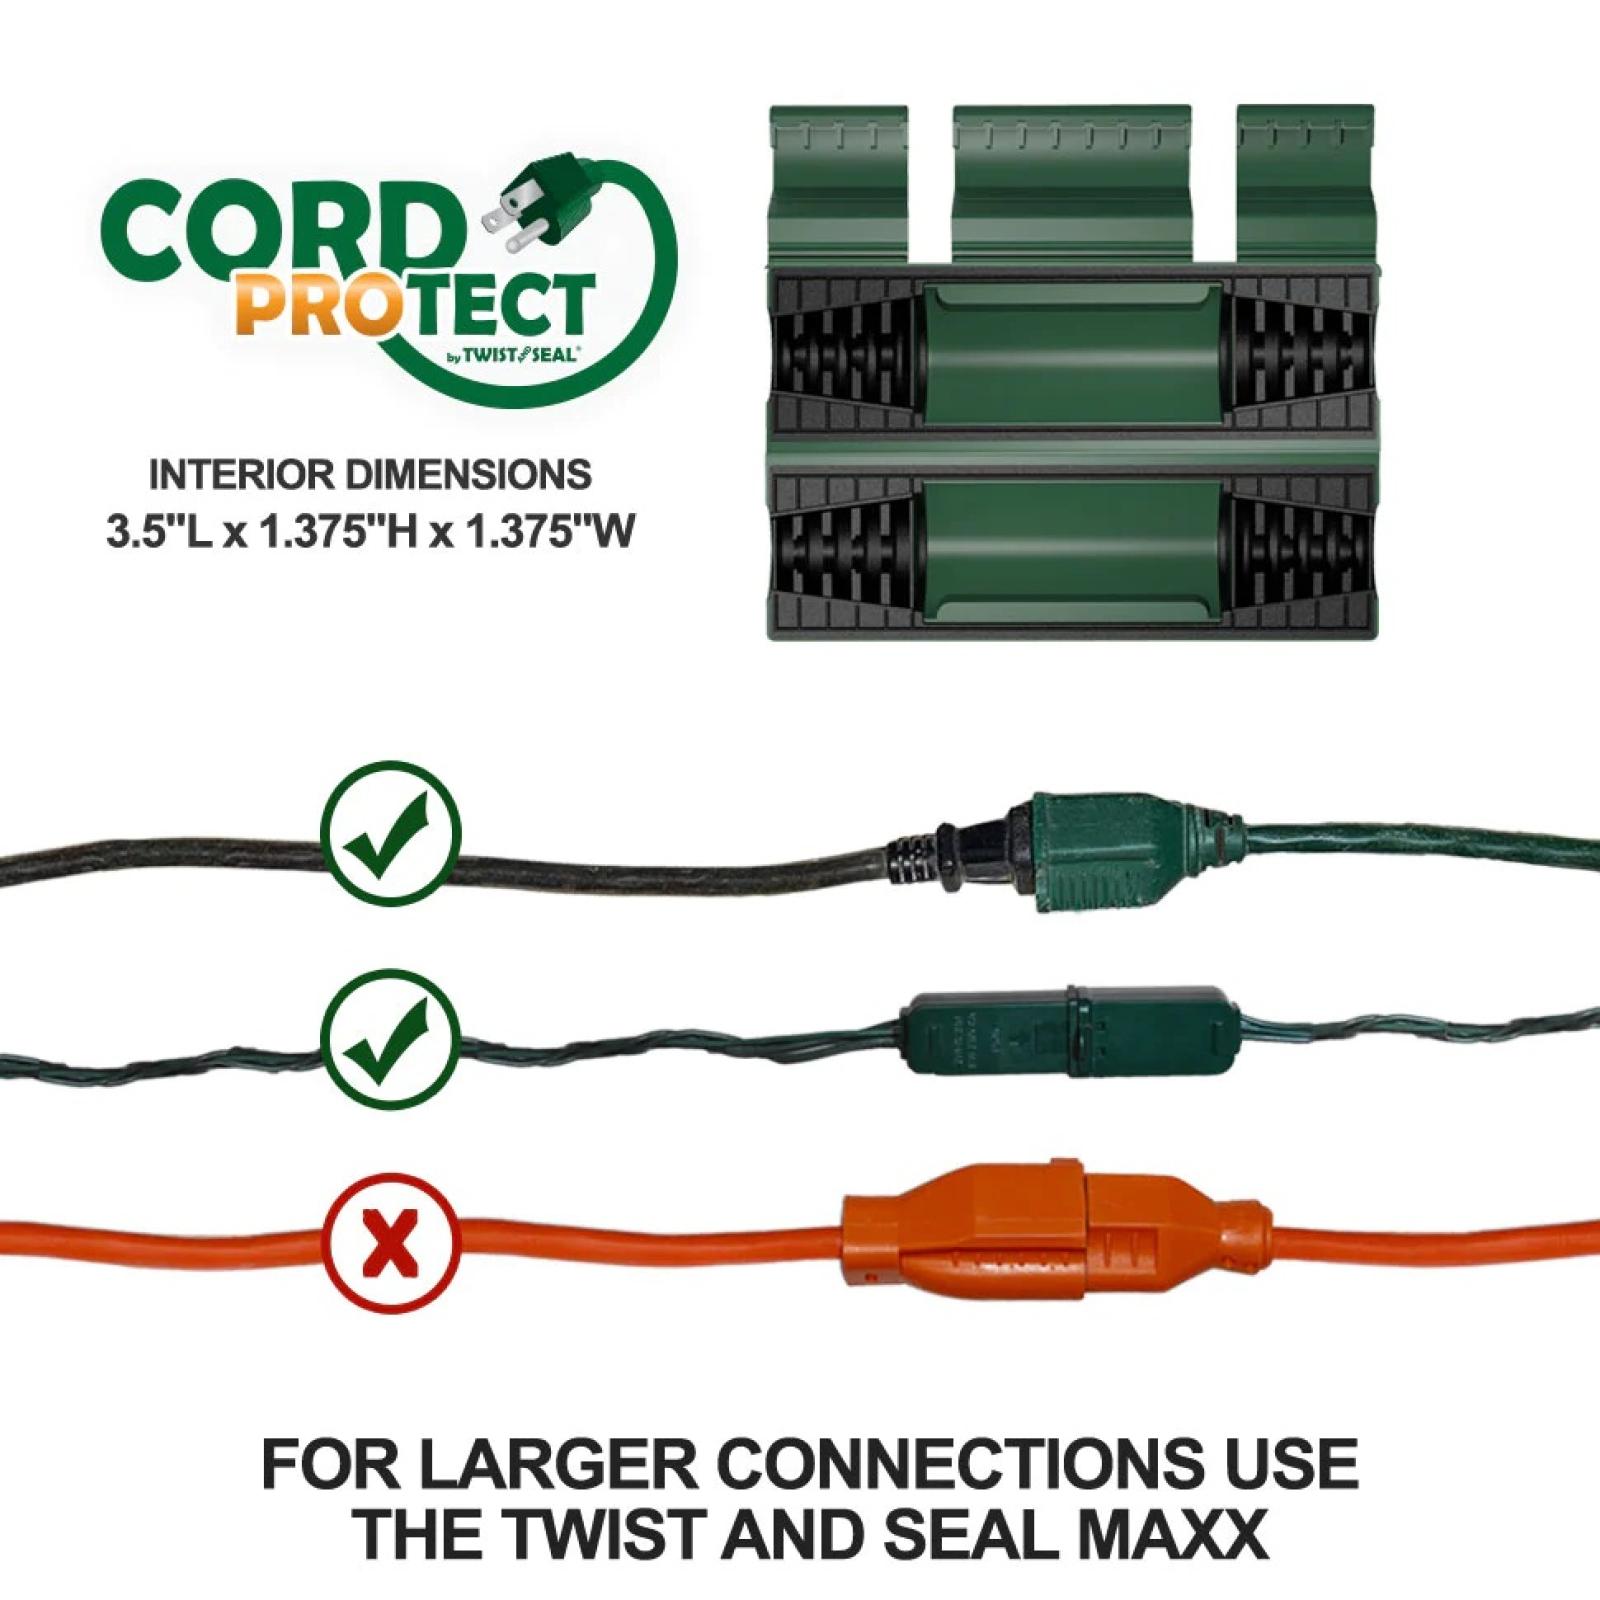 Twist and Seal Cord Protect